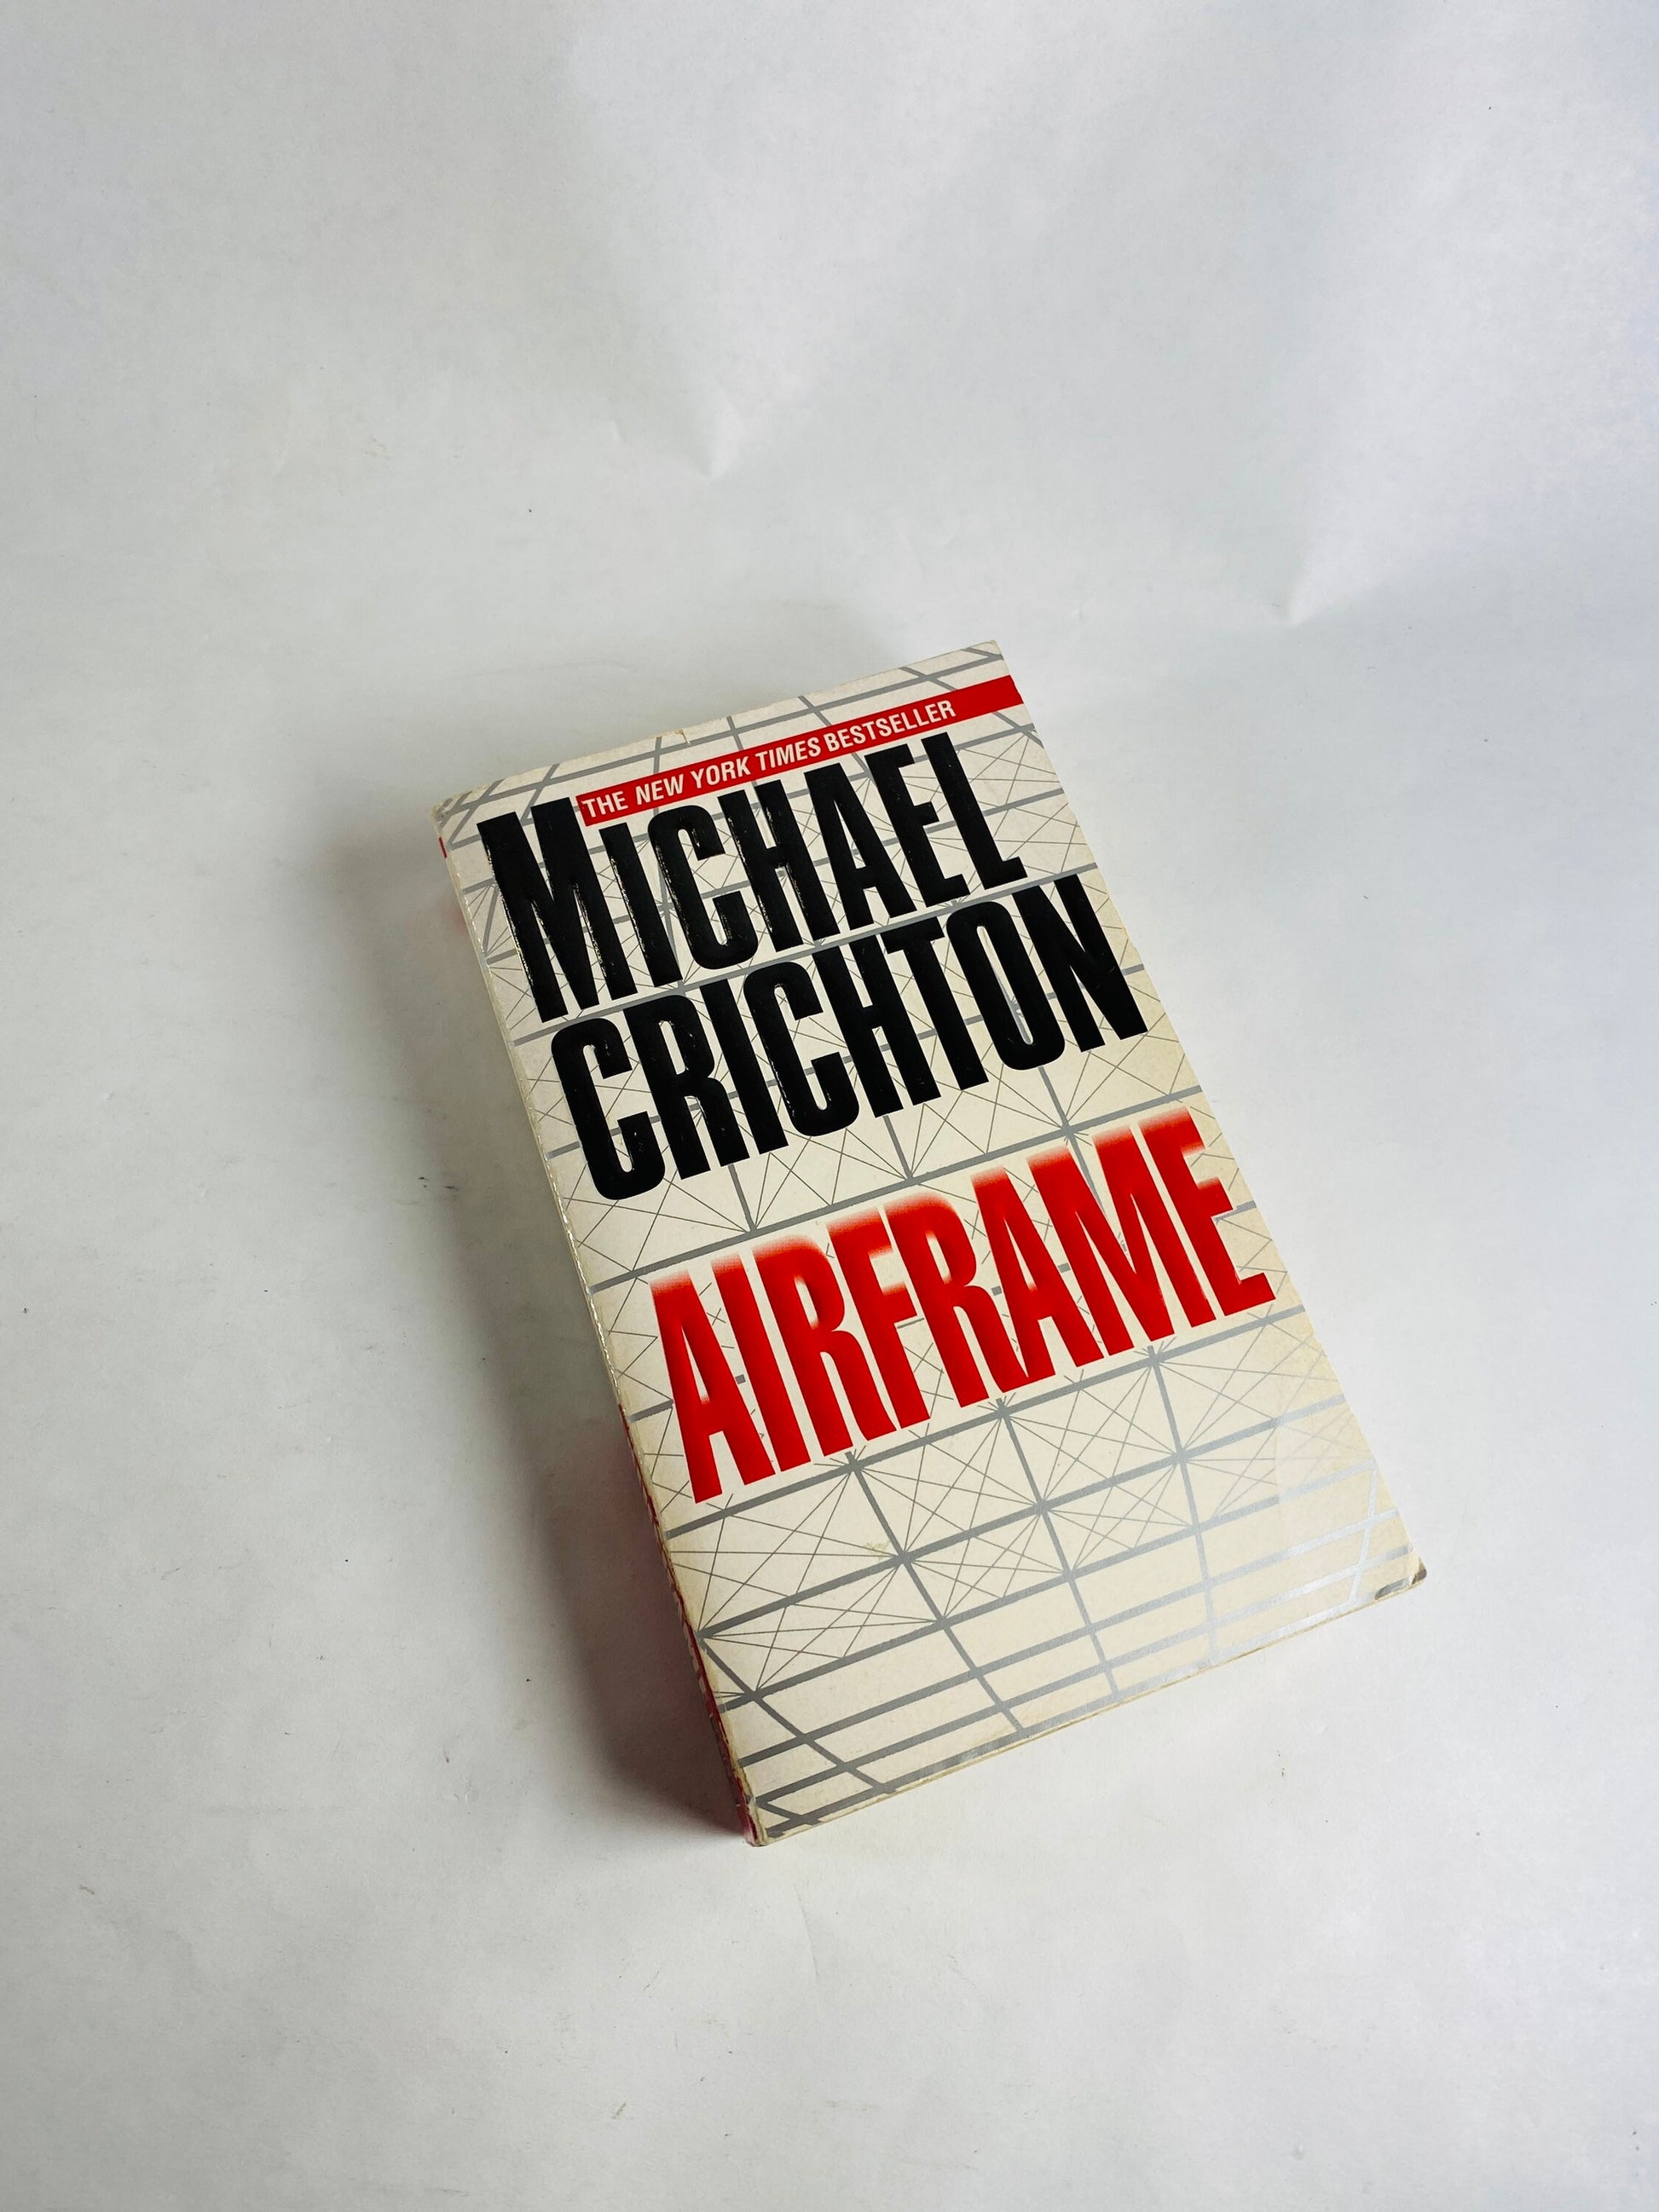 Airframe by Michael Crichton Early PRINTING vintage paperback book circa 1997